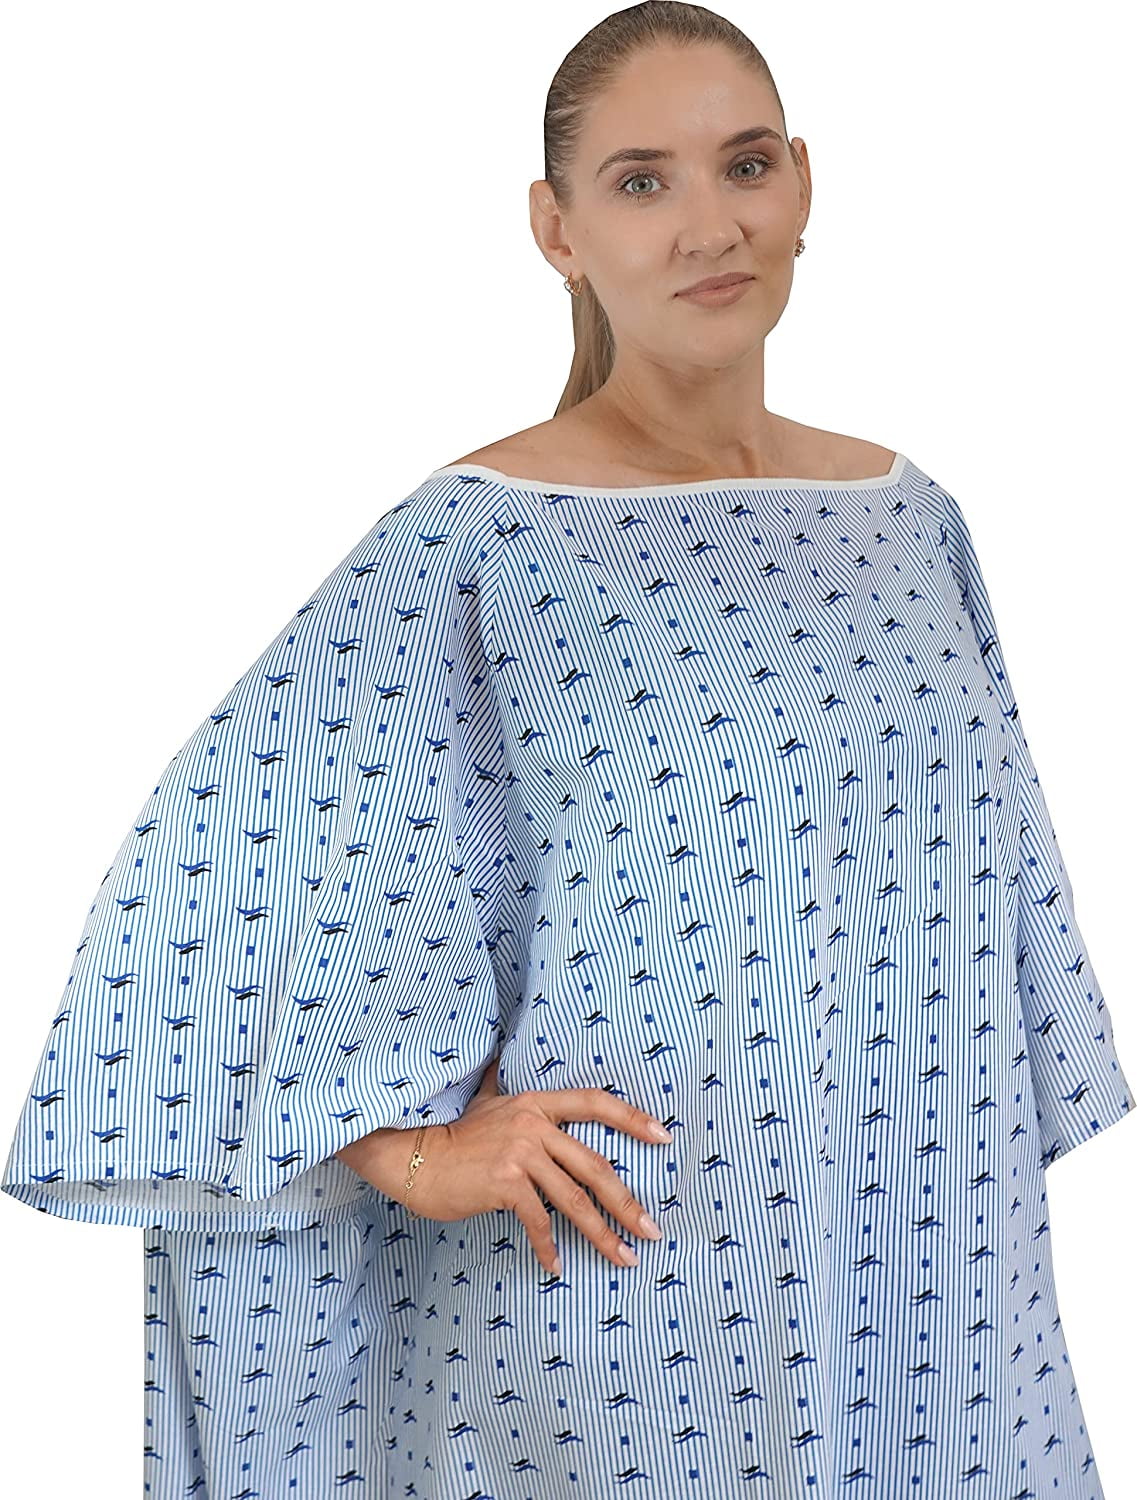 3 Pack 10XL Hospital Hospital Gown with Tie Back Oversized Hospital Gown Patient Robe Big Size for Hospitals and Home Care 8991d83e 557f 44d4 8871 0a1b7e395938.aad59191361ee1a159311e649b771b02